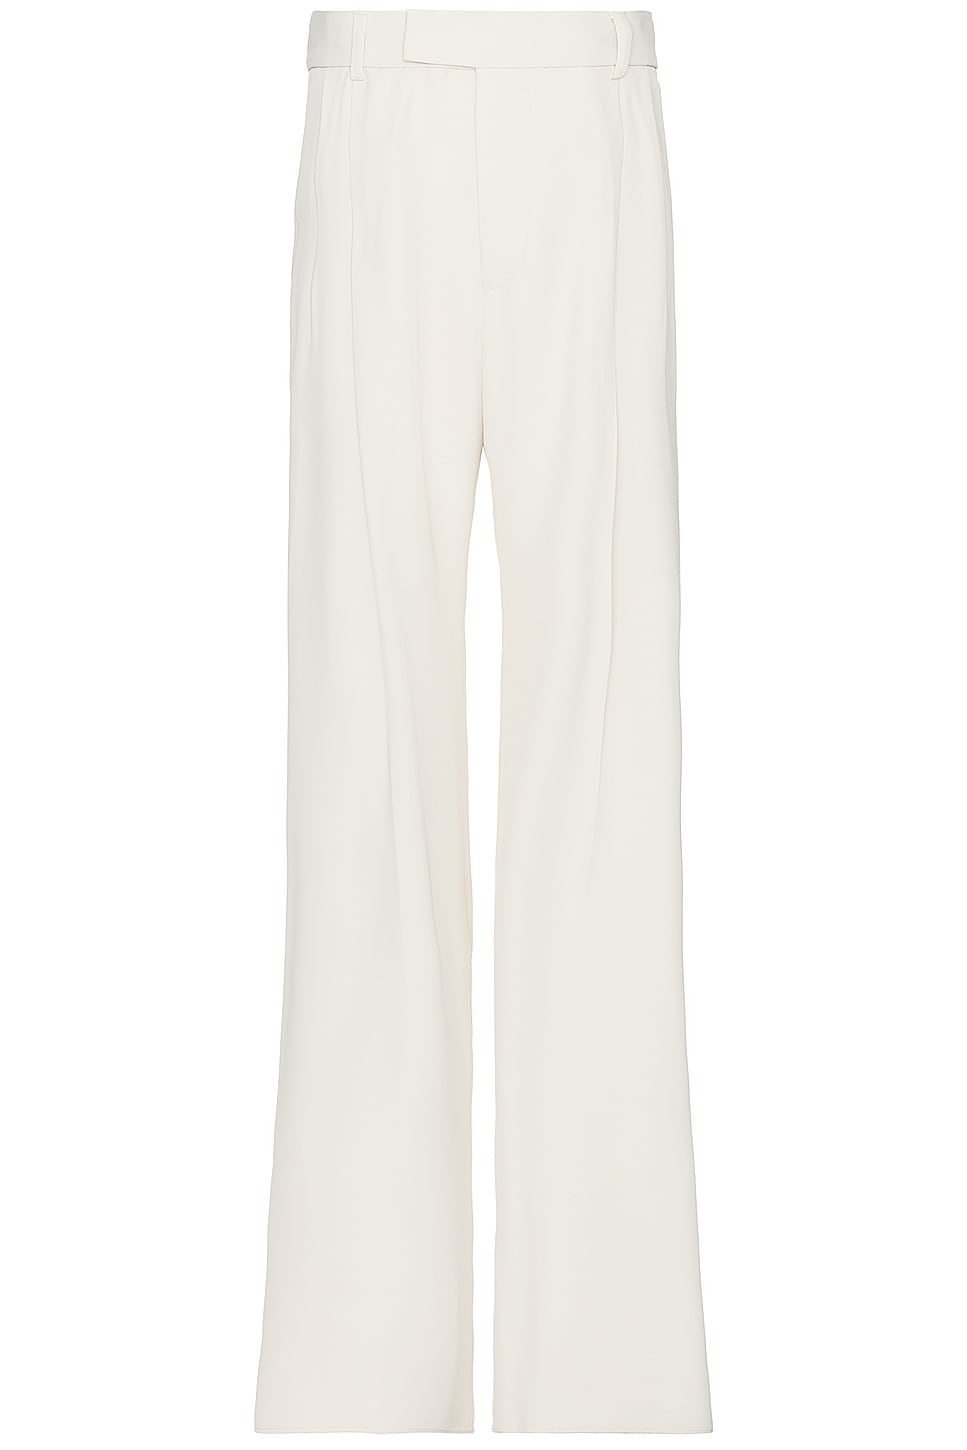 Image 1 of Amiri Double Pleated Pant in Summer Sand